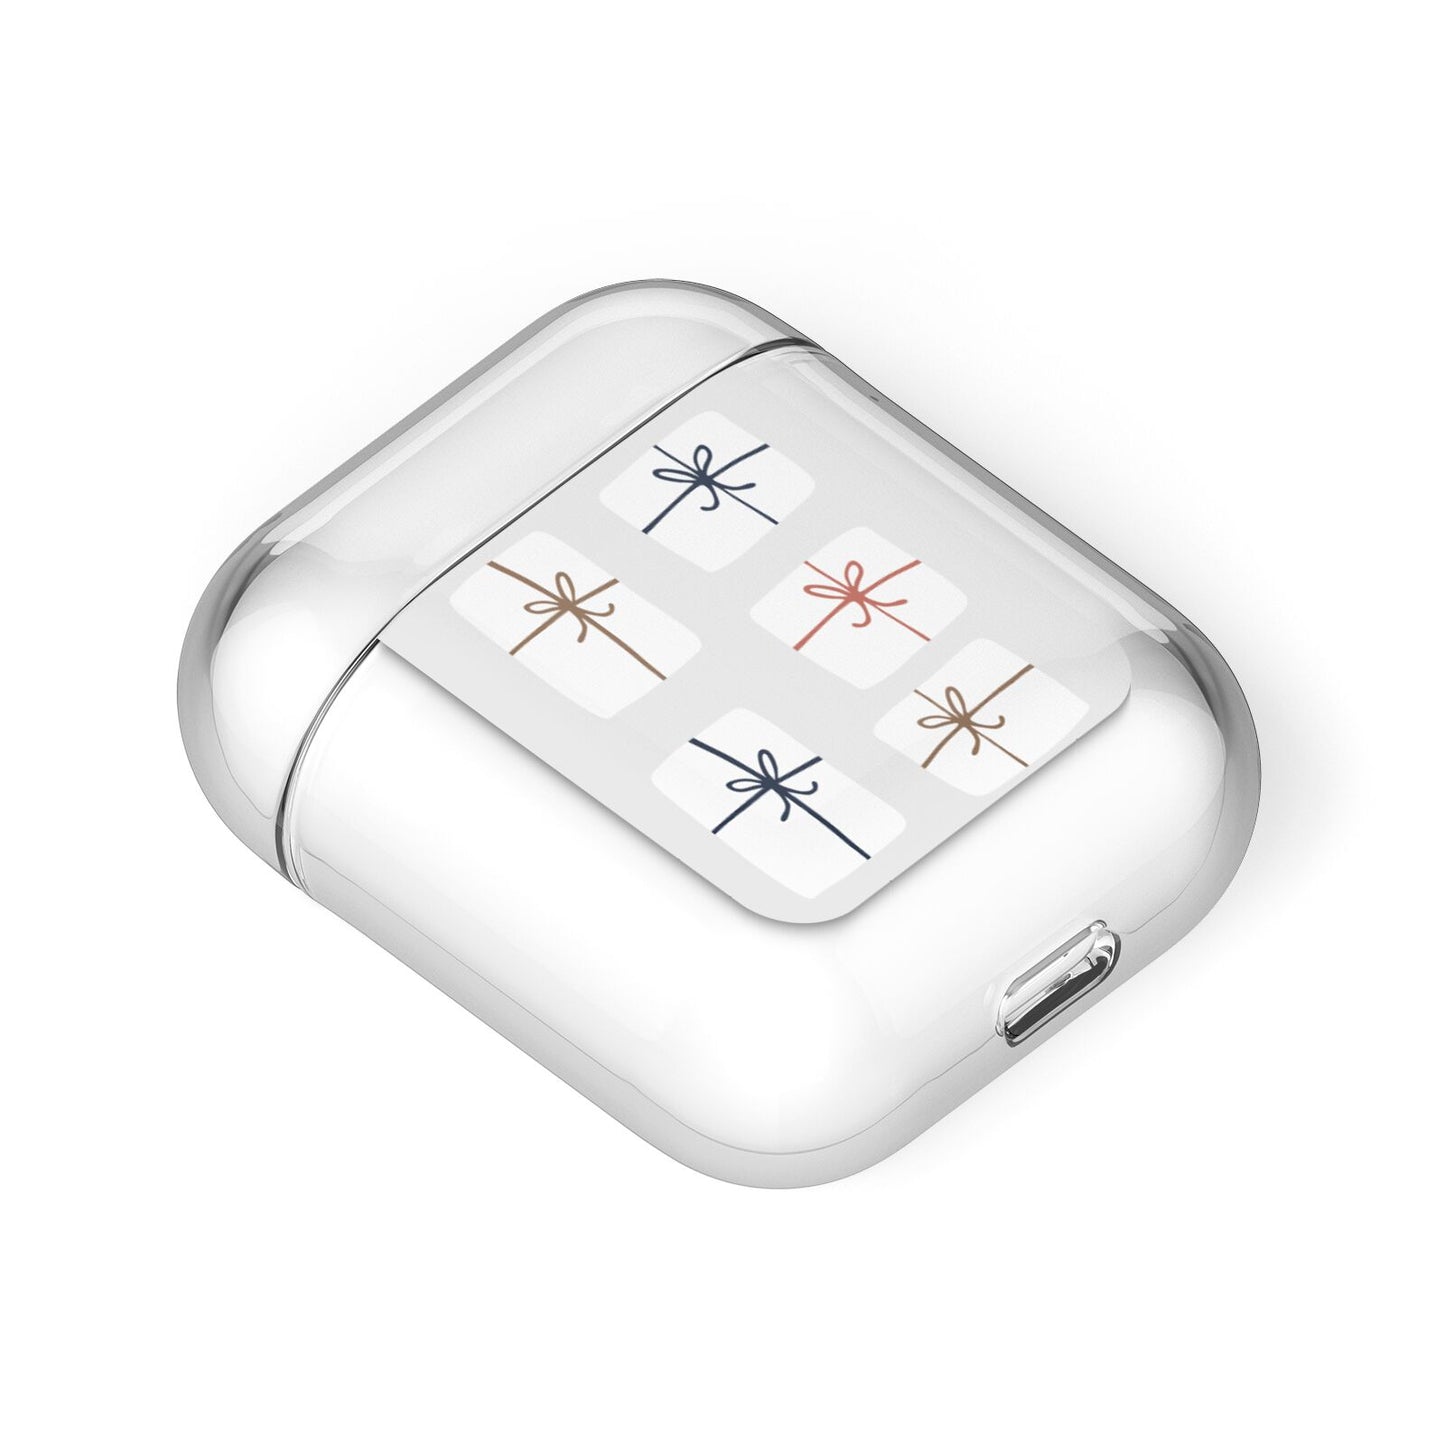 White Presents AirPods Case Laid Flat